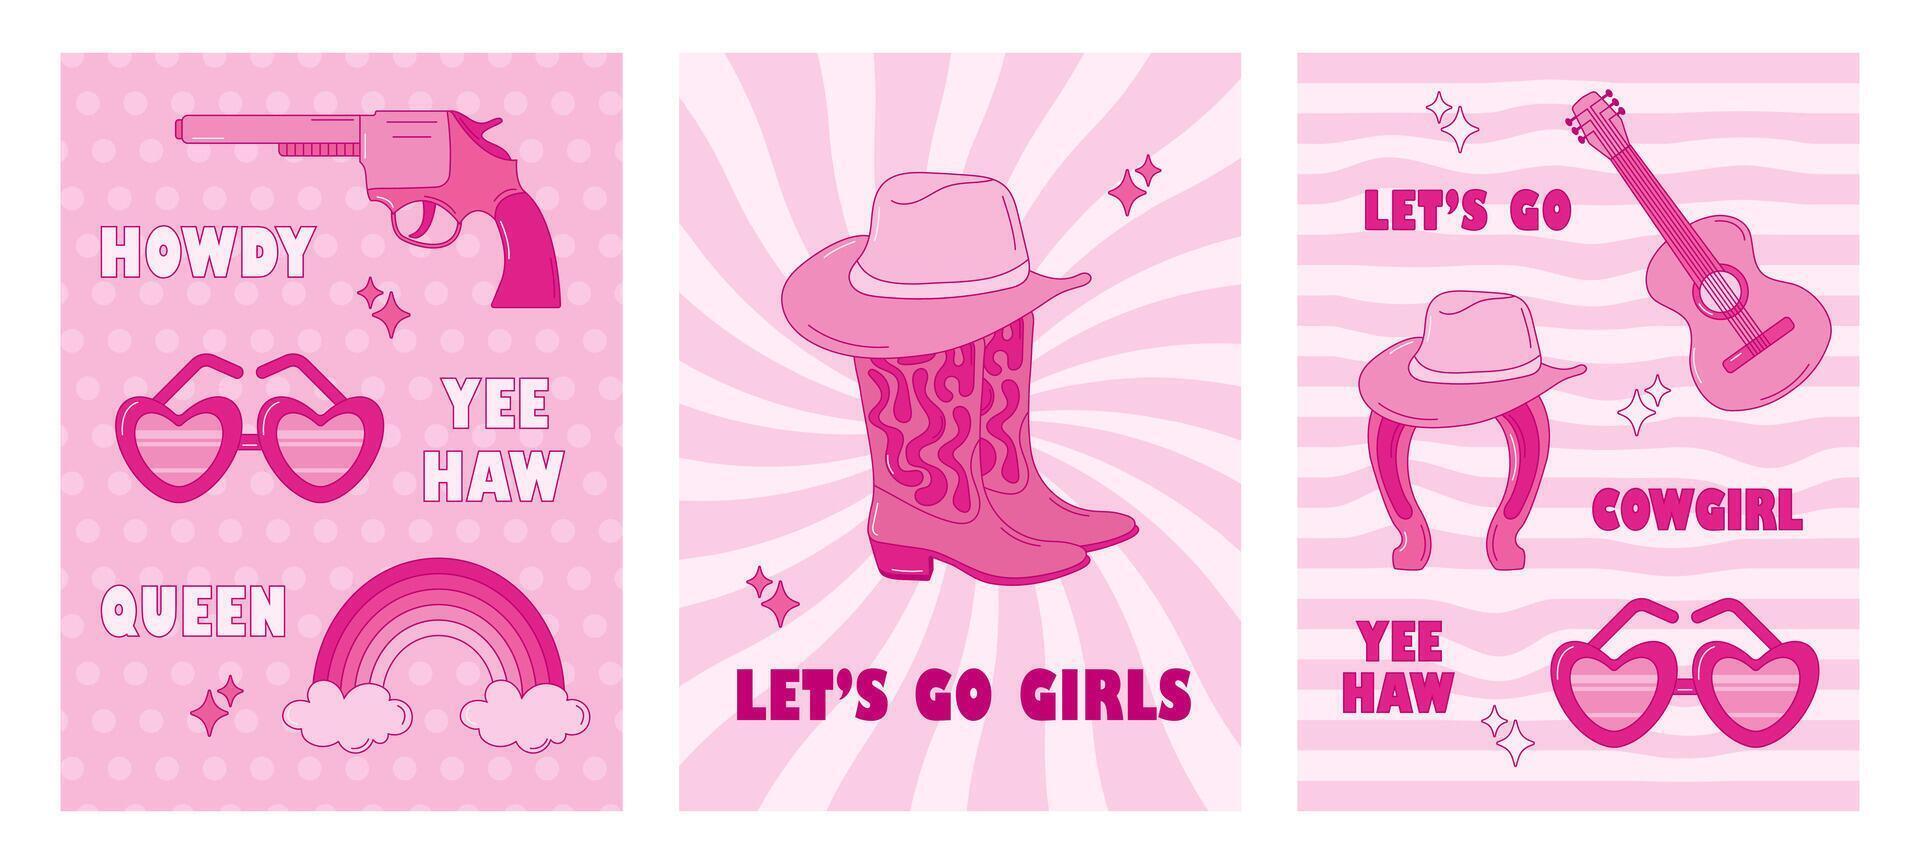 Retro pink cowgirl posters set. Set of wild west posters with illustration in pink color. Trendy retro posters with hat, revolver, glasses, horseshoe, boots vector